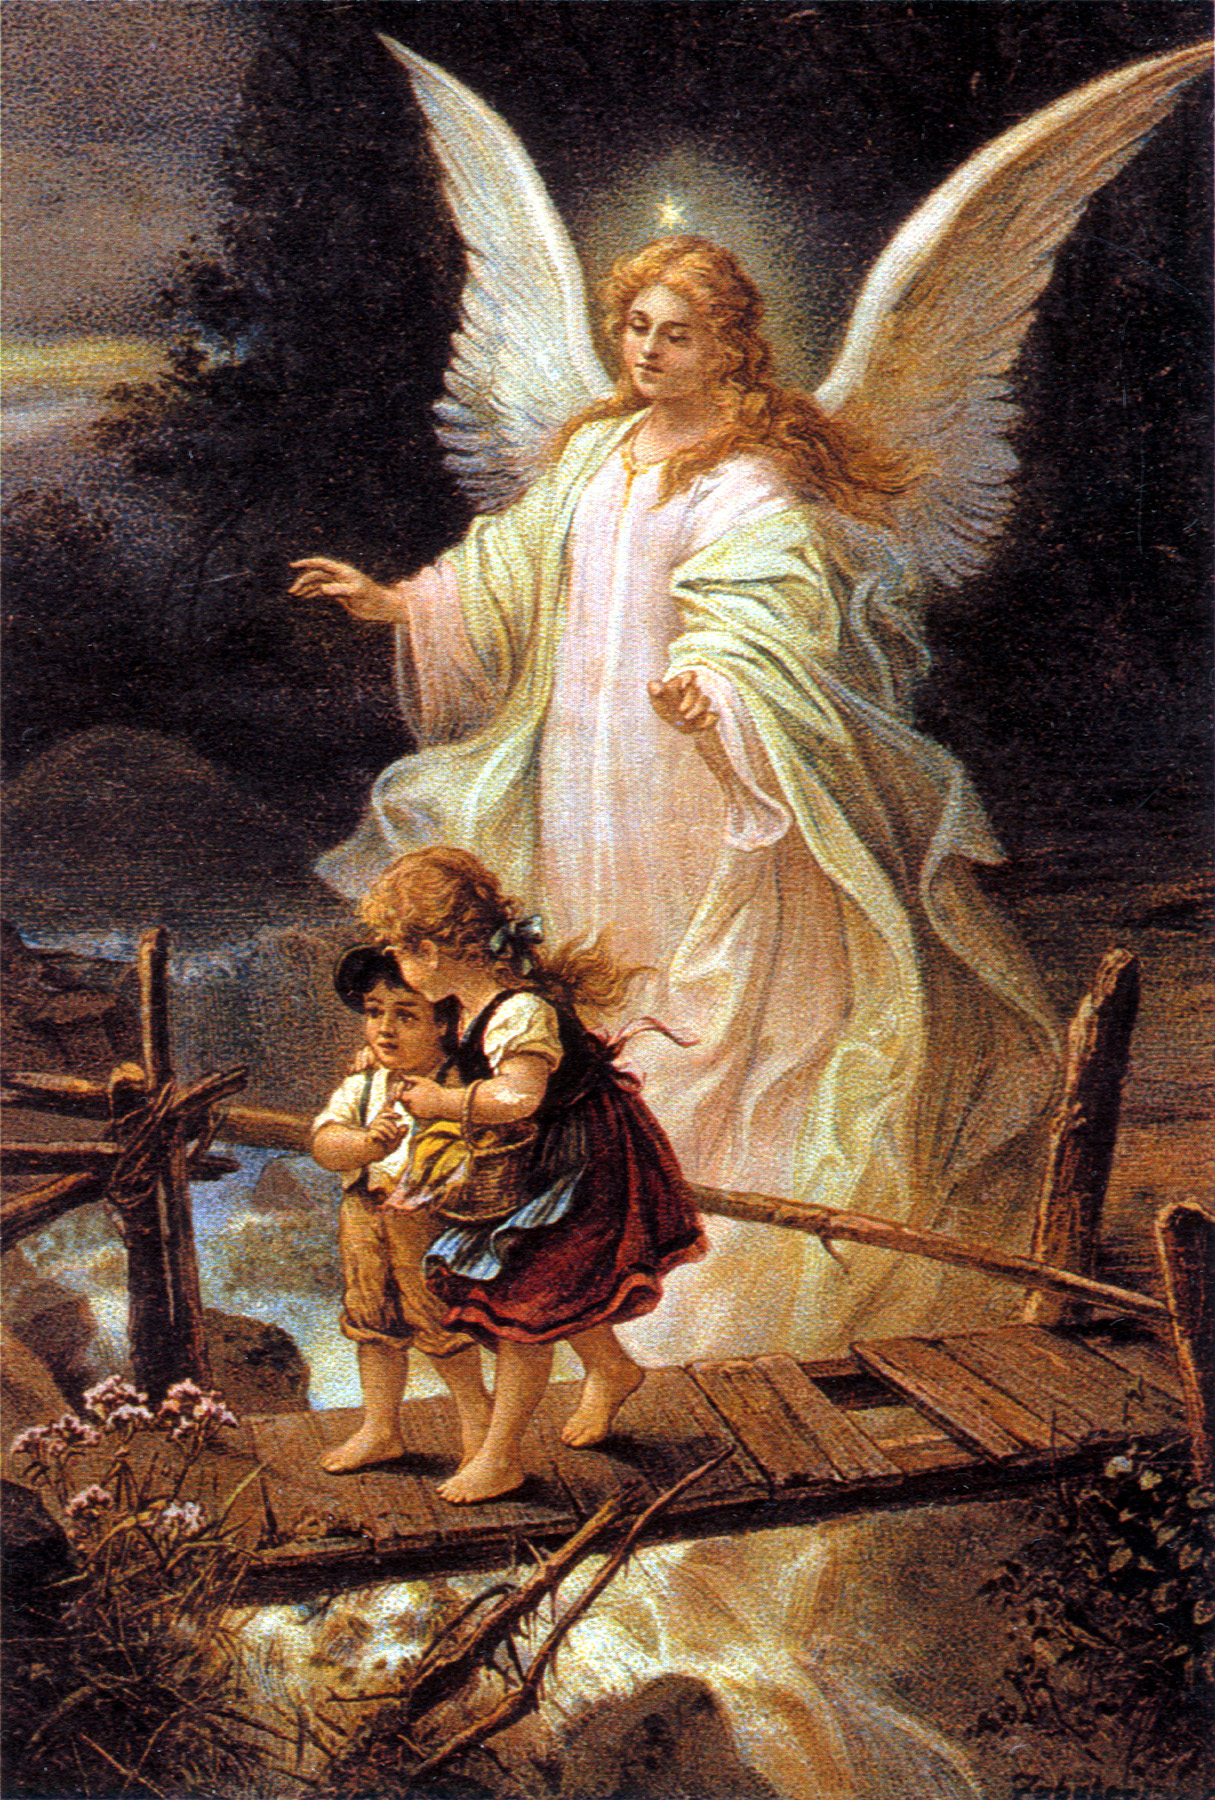 Guardian Angel Blessing Child Graphic - Images, Photos, Pictures